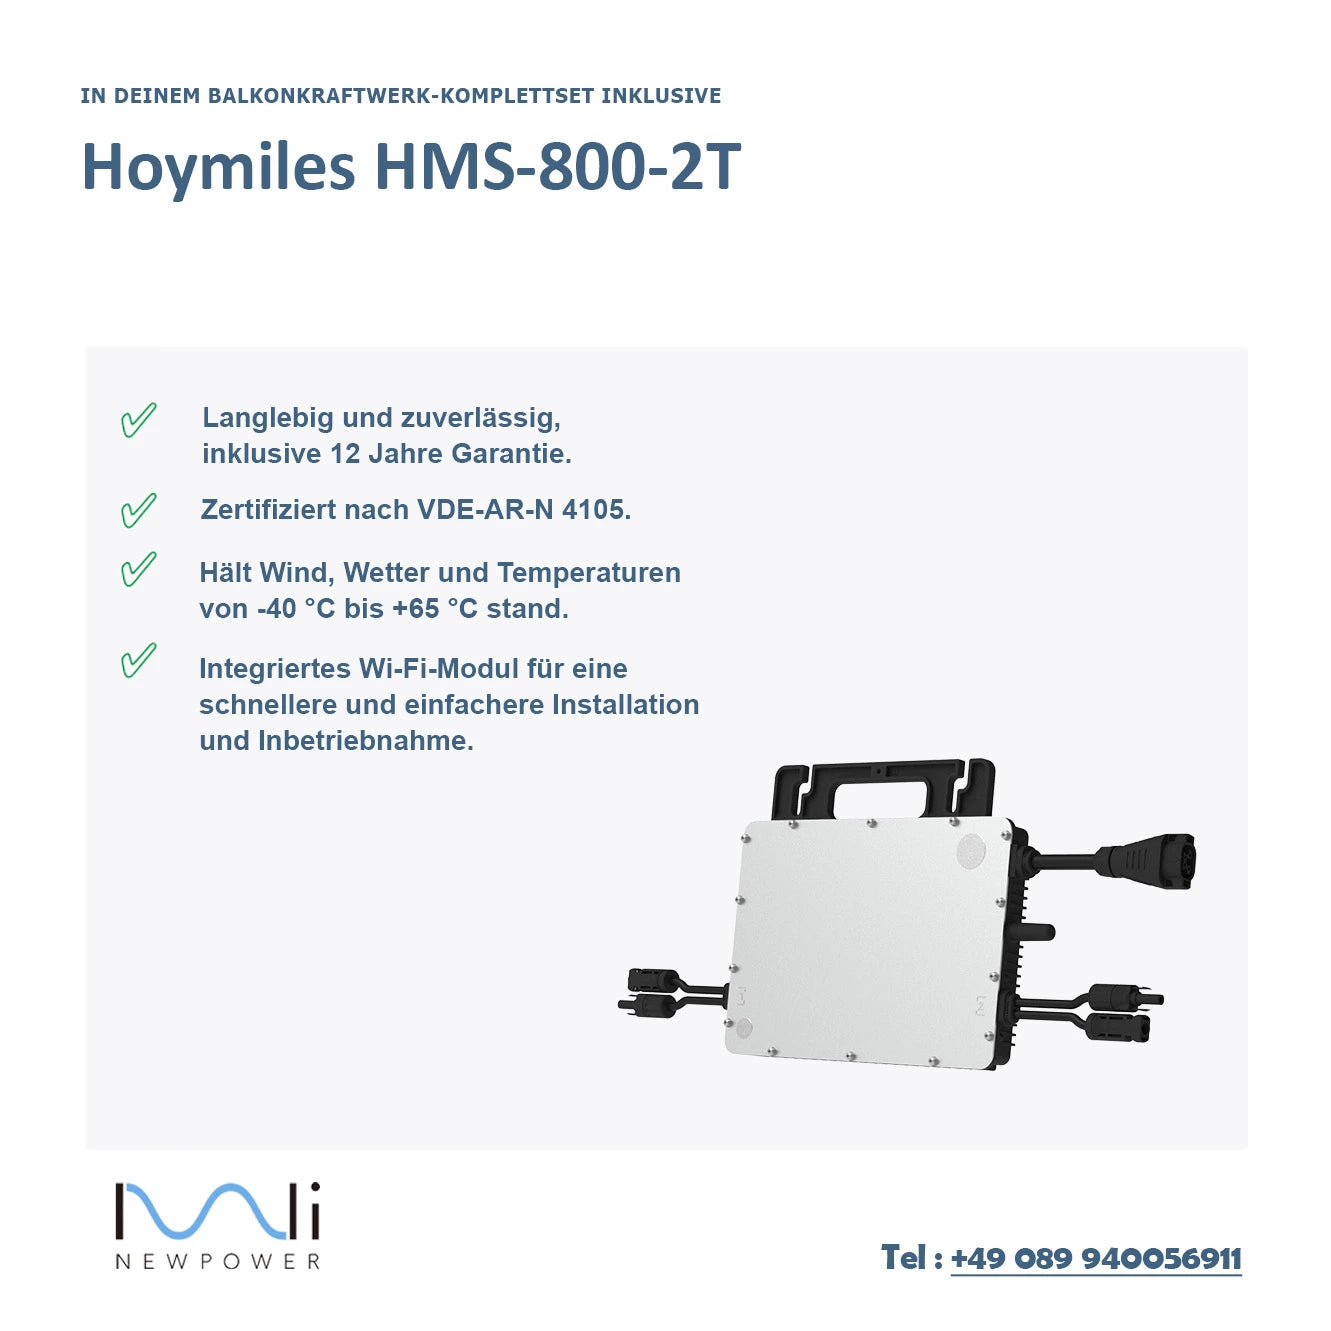 Hoymiles HMS-800W-2T microinverter with WiFi integrated